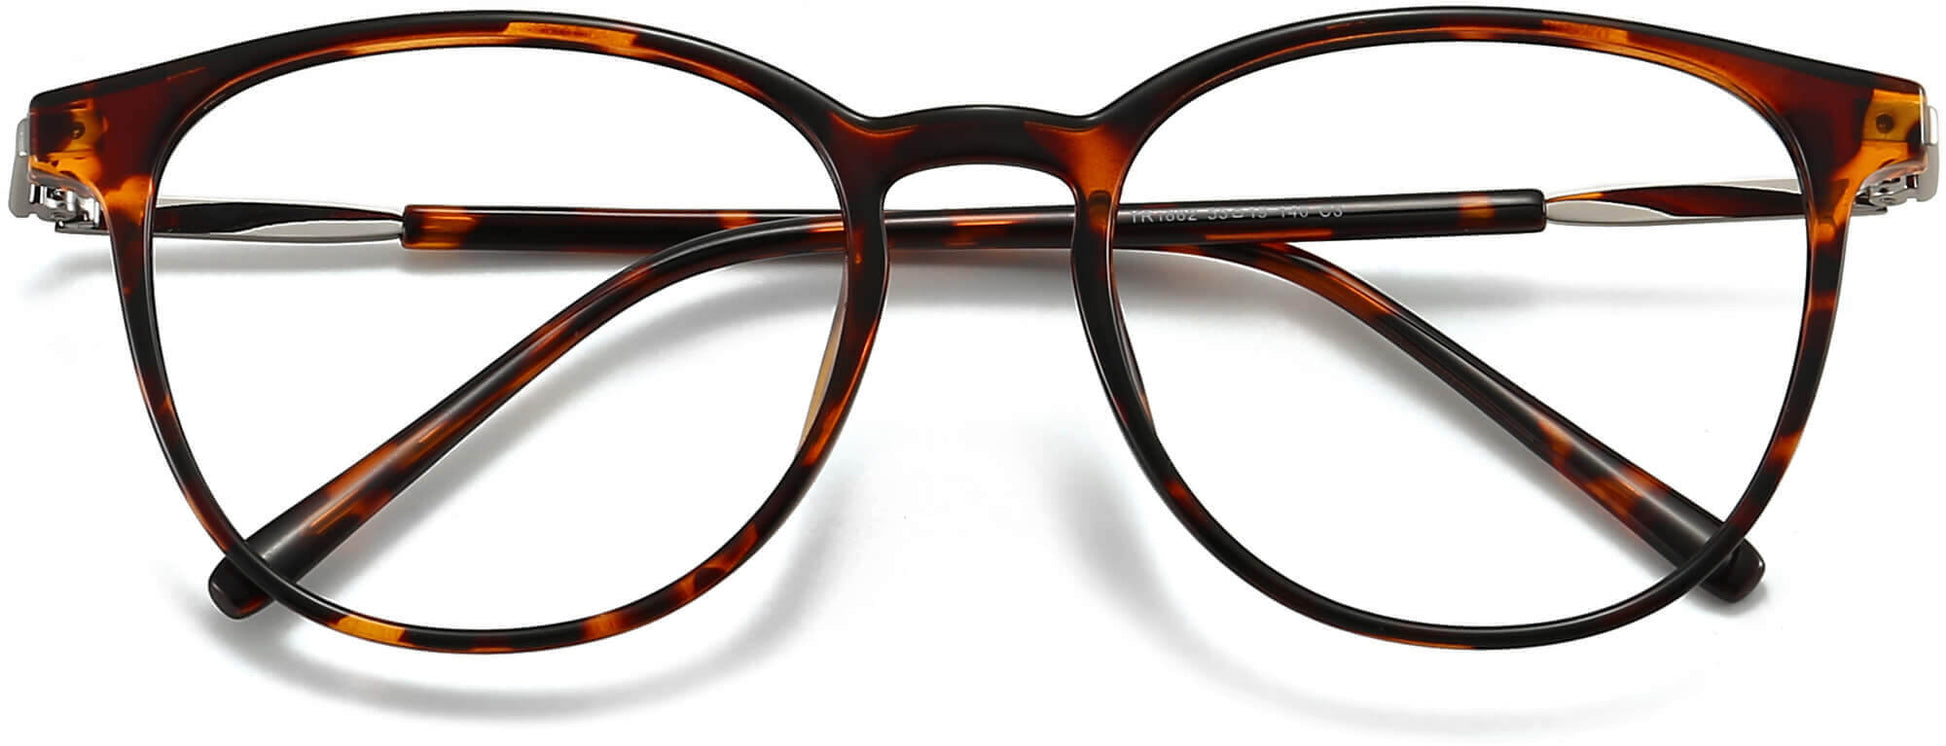 Clementine Round Tortoise Eyeglasses from ANRRI, closed view